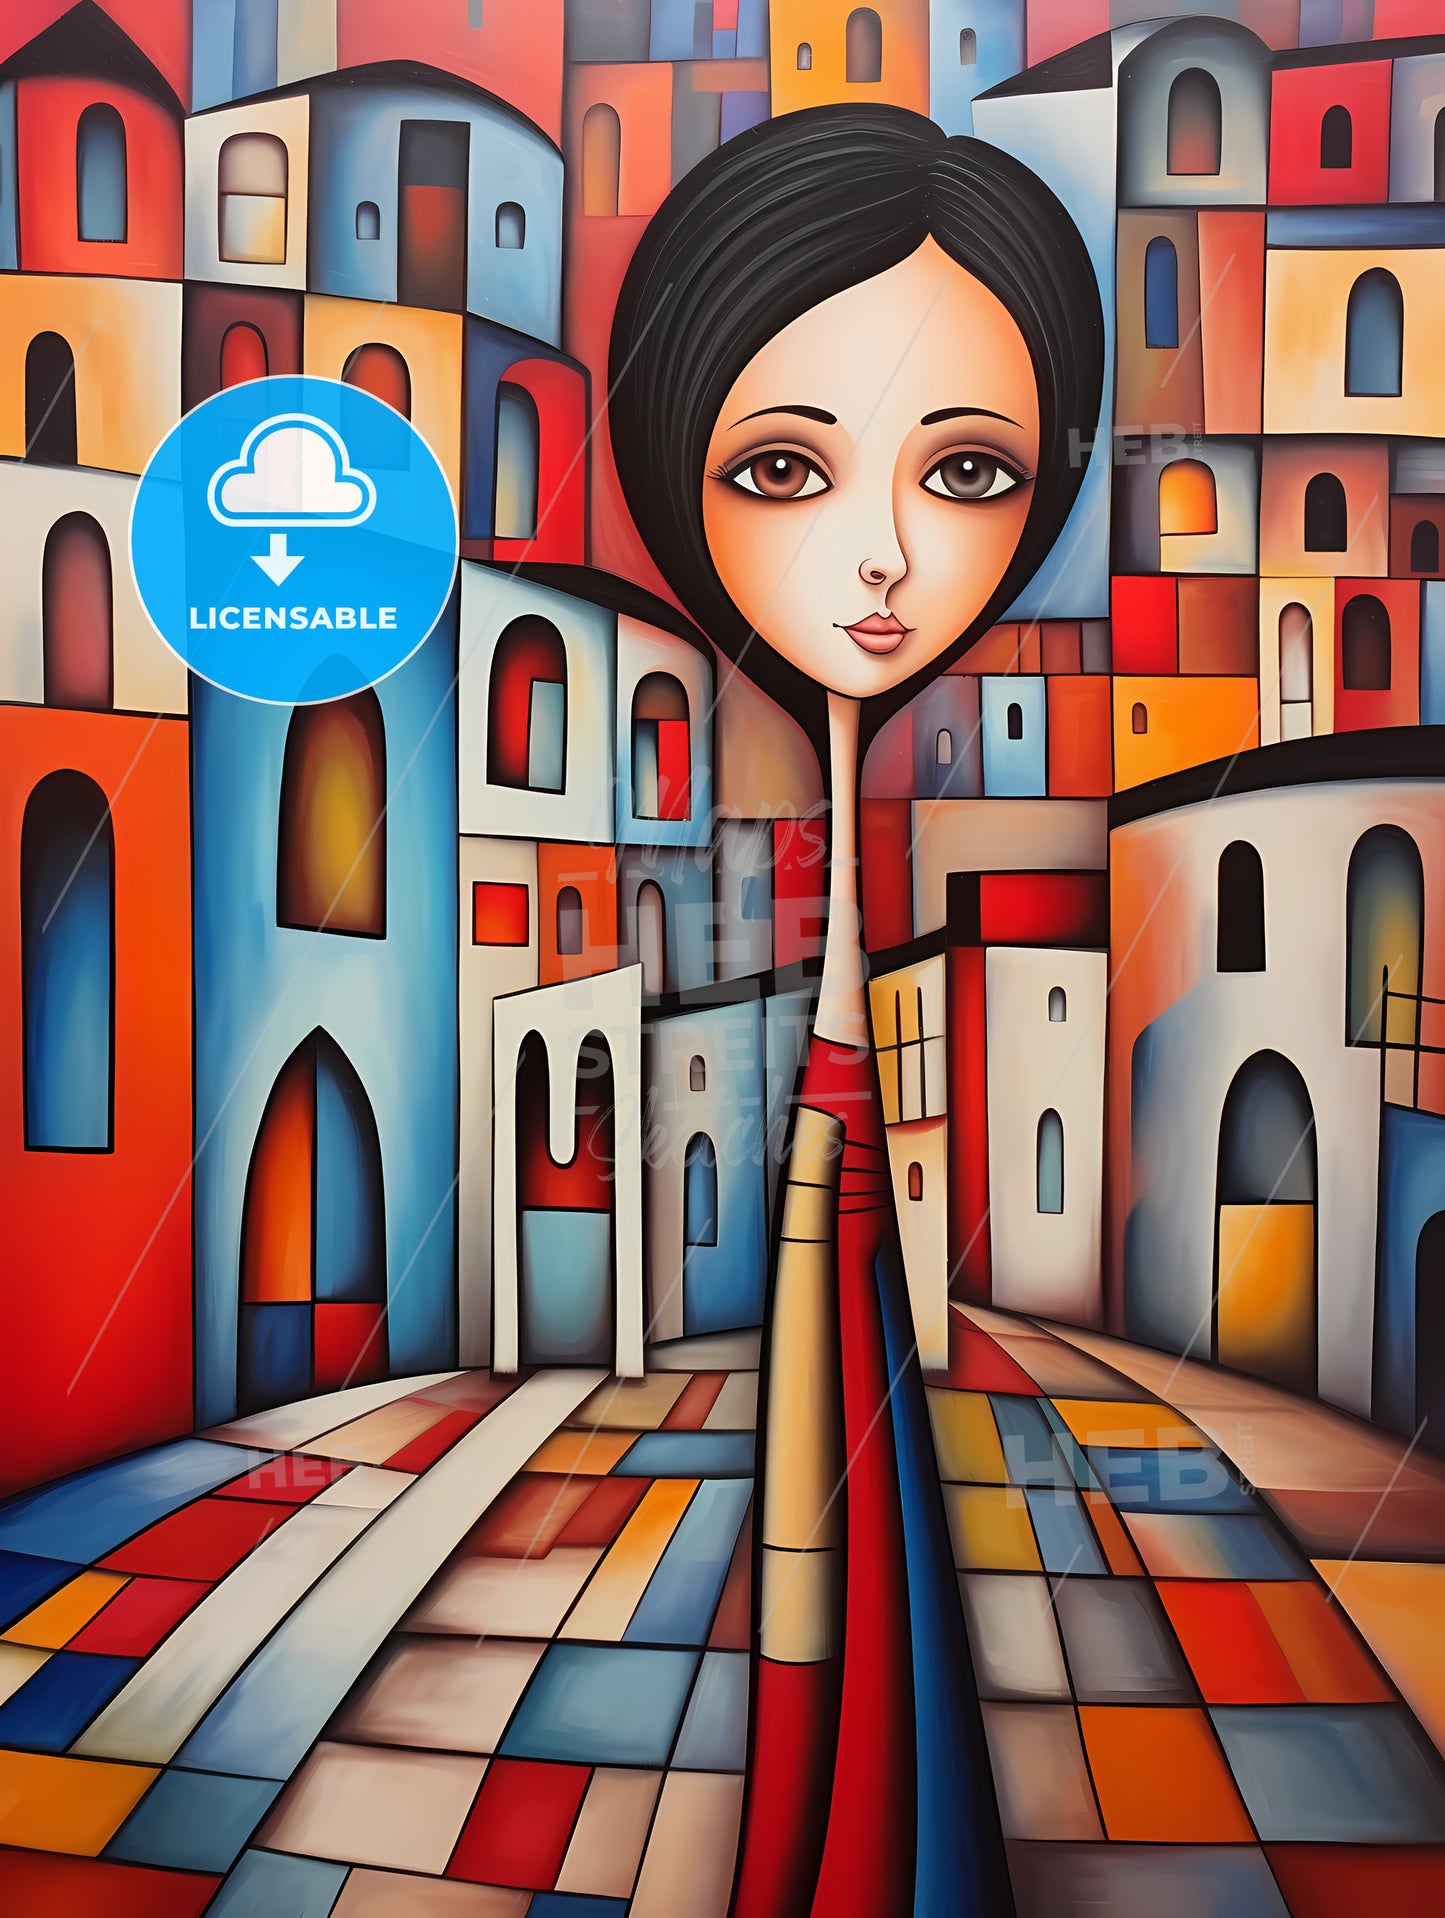 A Painting Of A Woman In A City